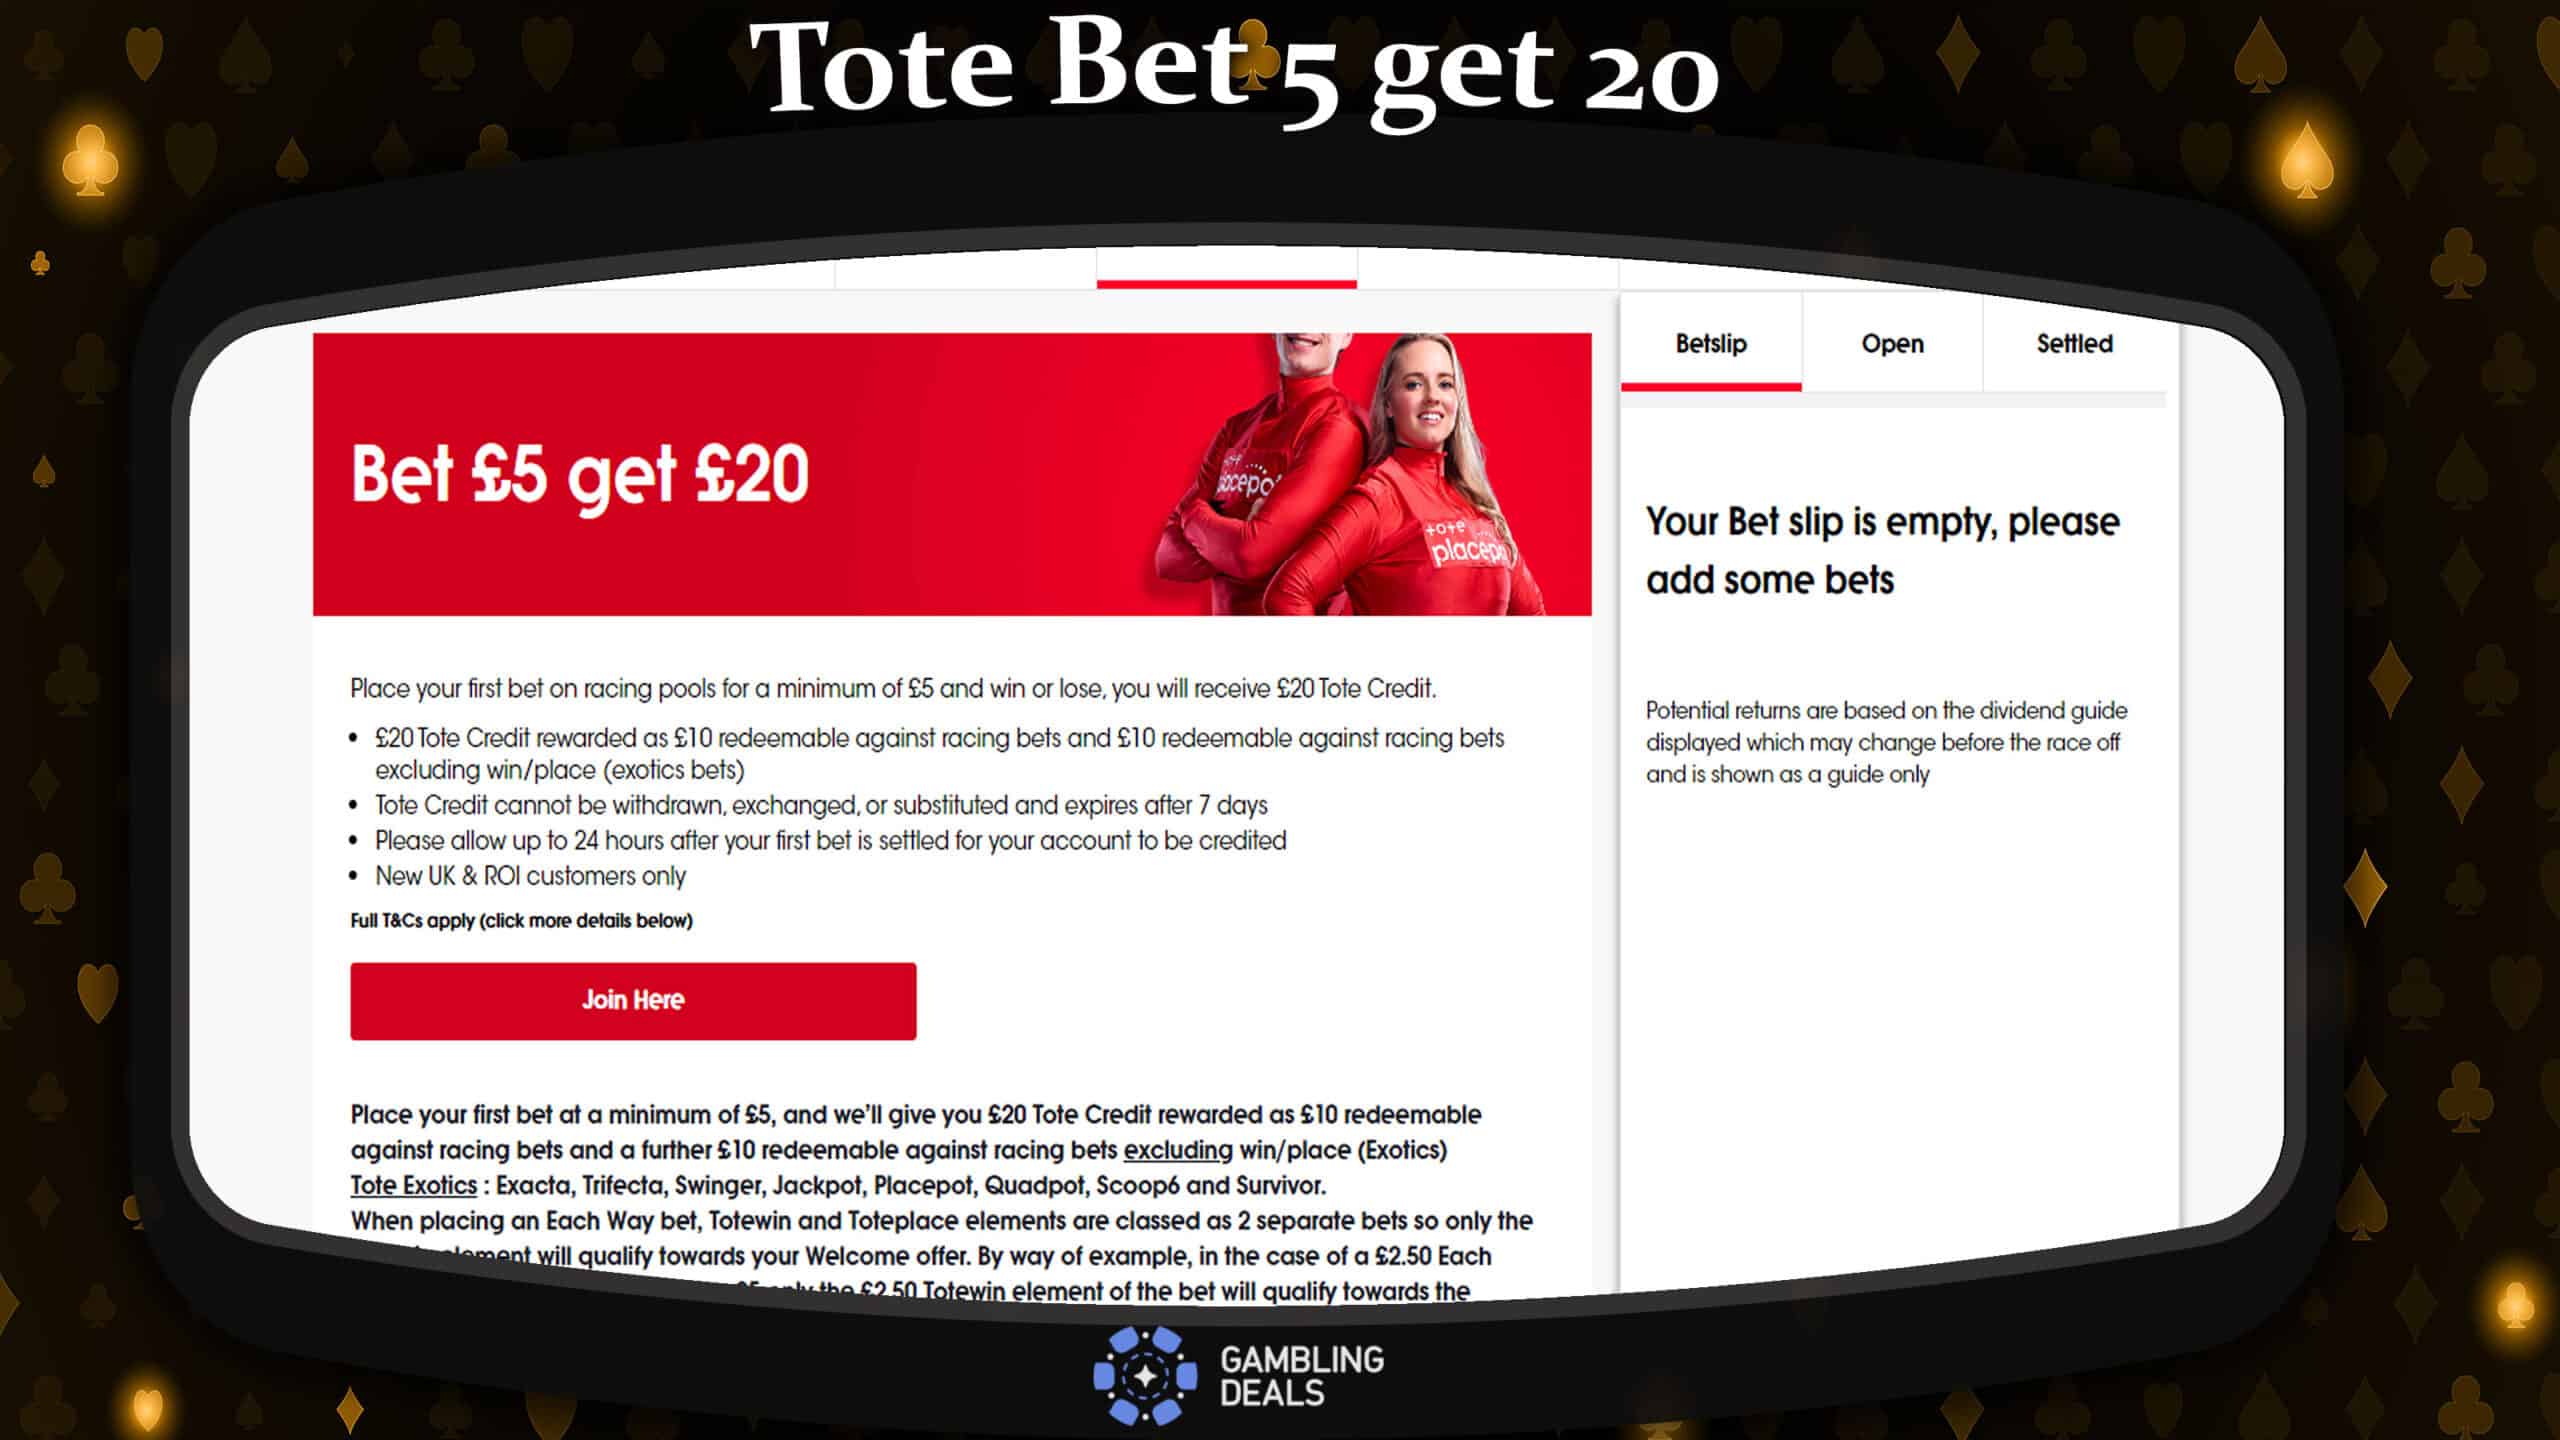 Featured image for Tote Bet 5 get 20 offer